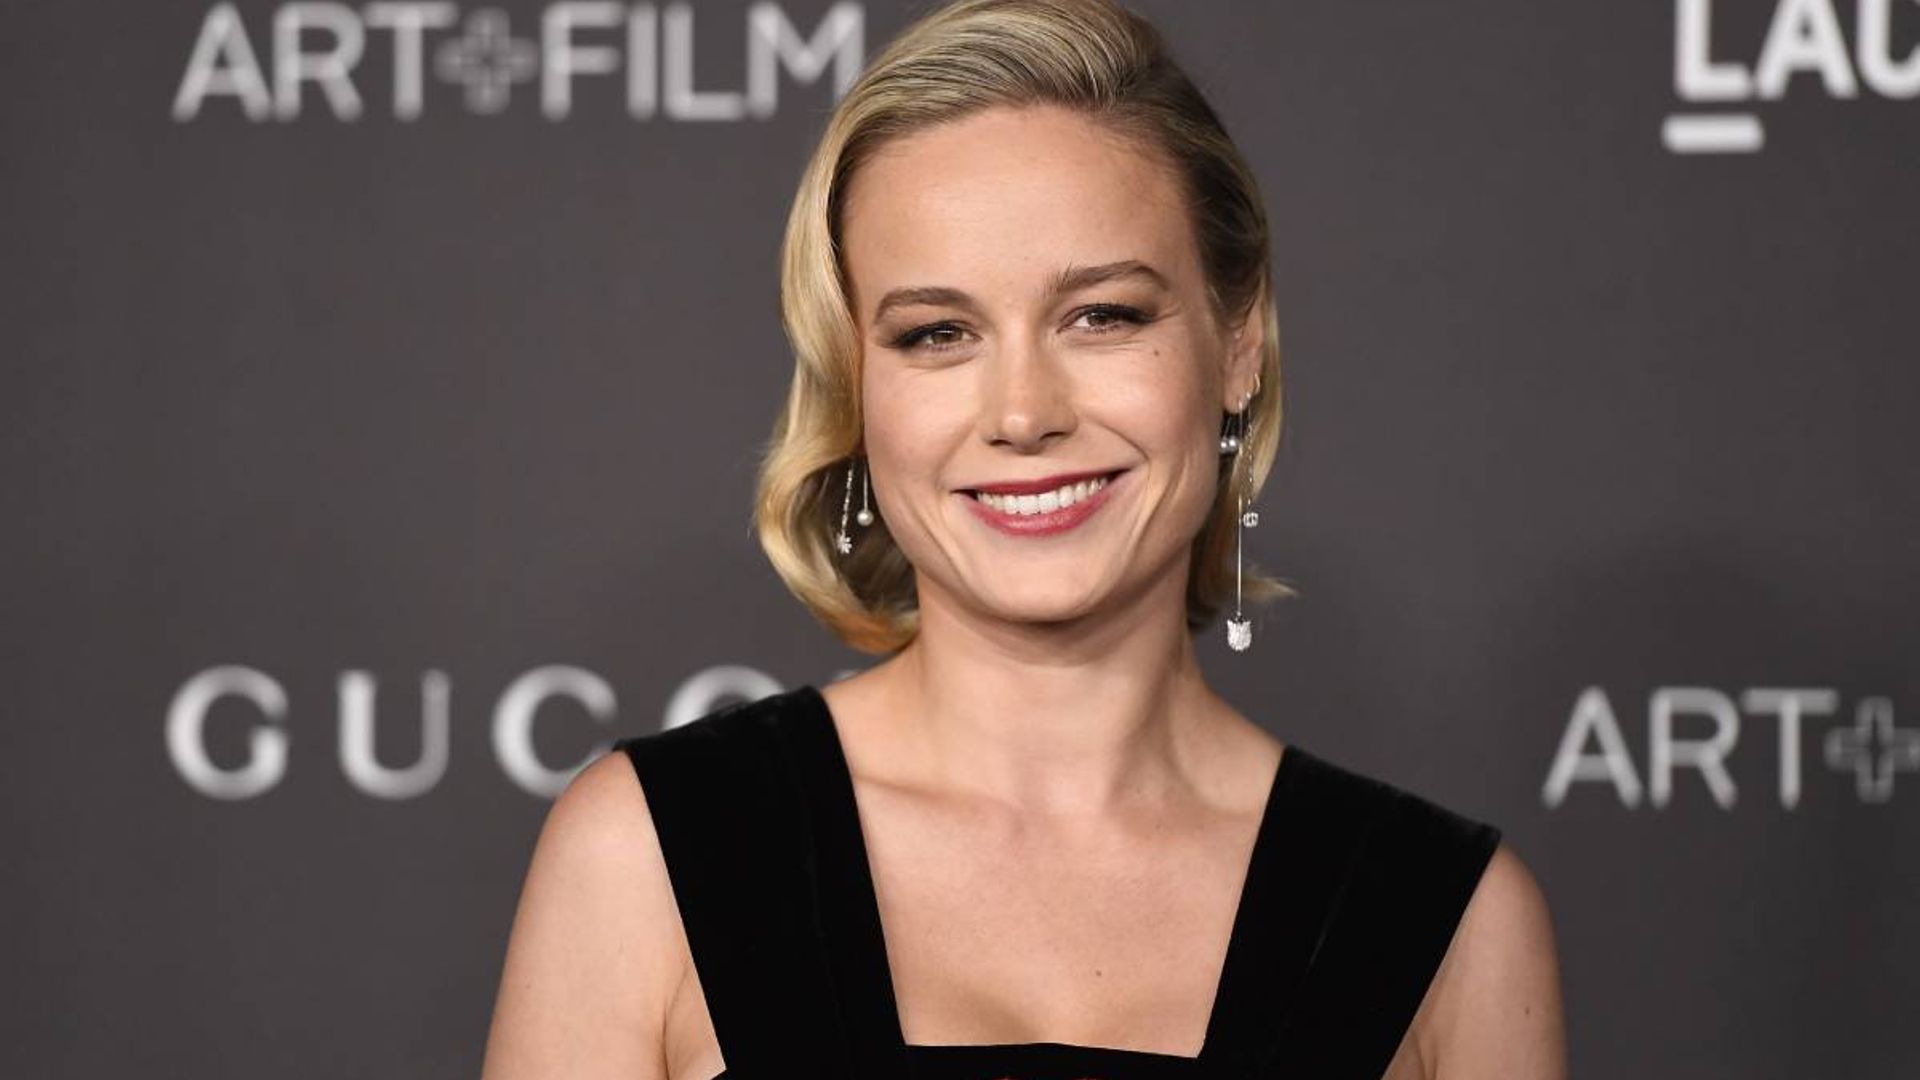 Brie Larson stuns in a tie-dye top - and it’s less than $40